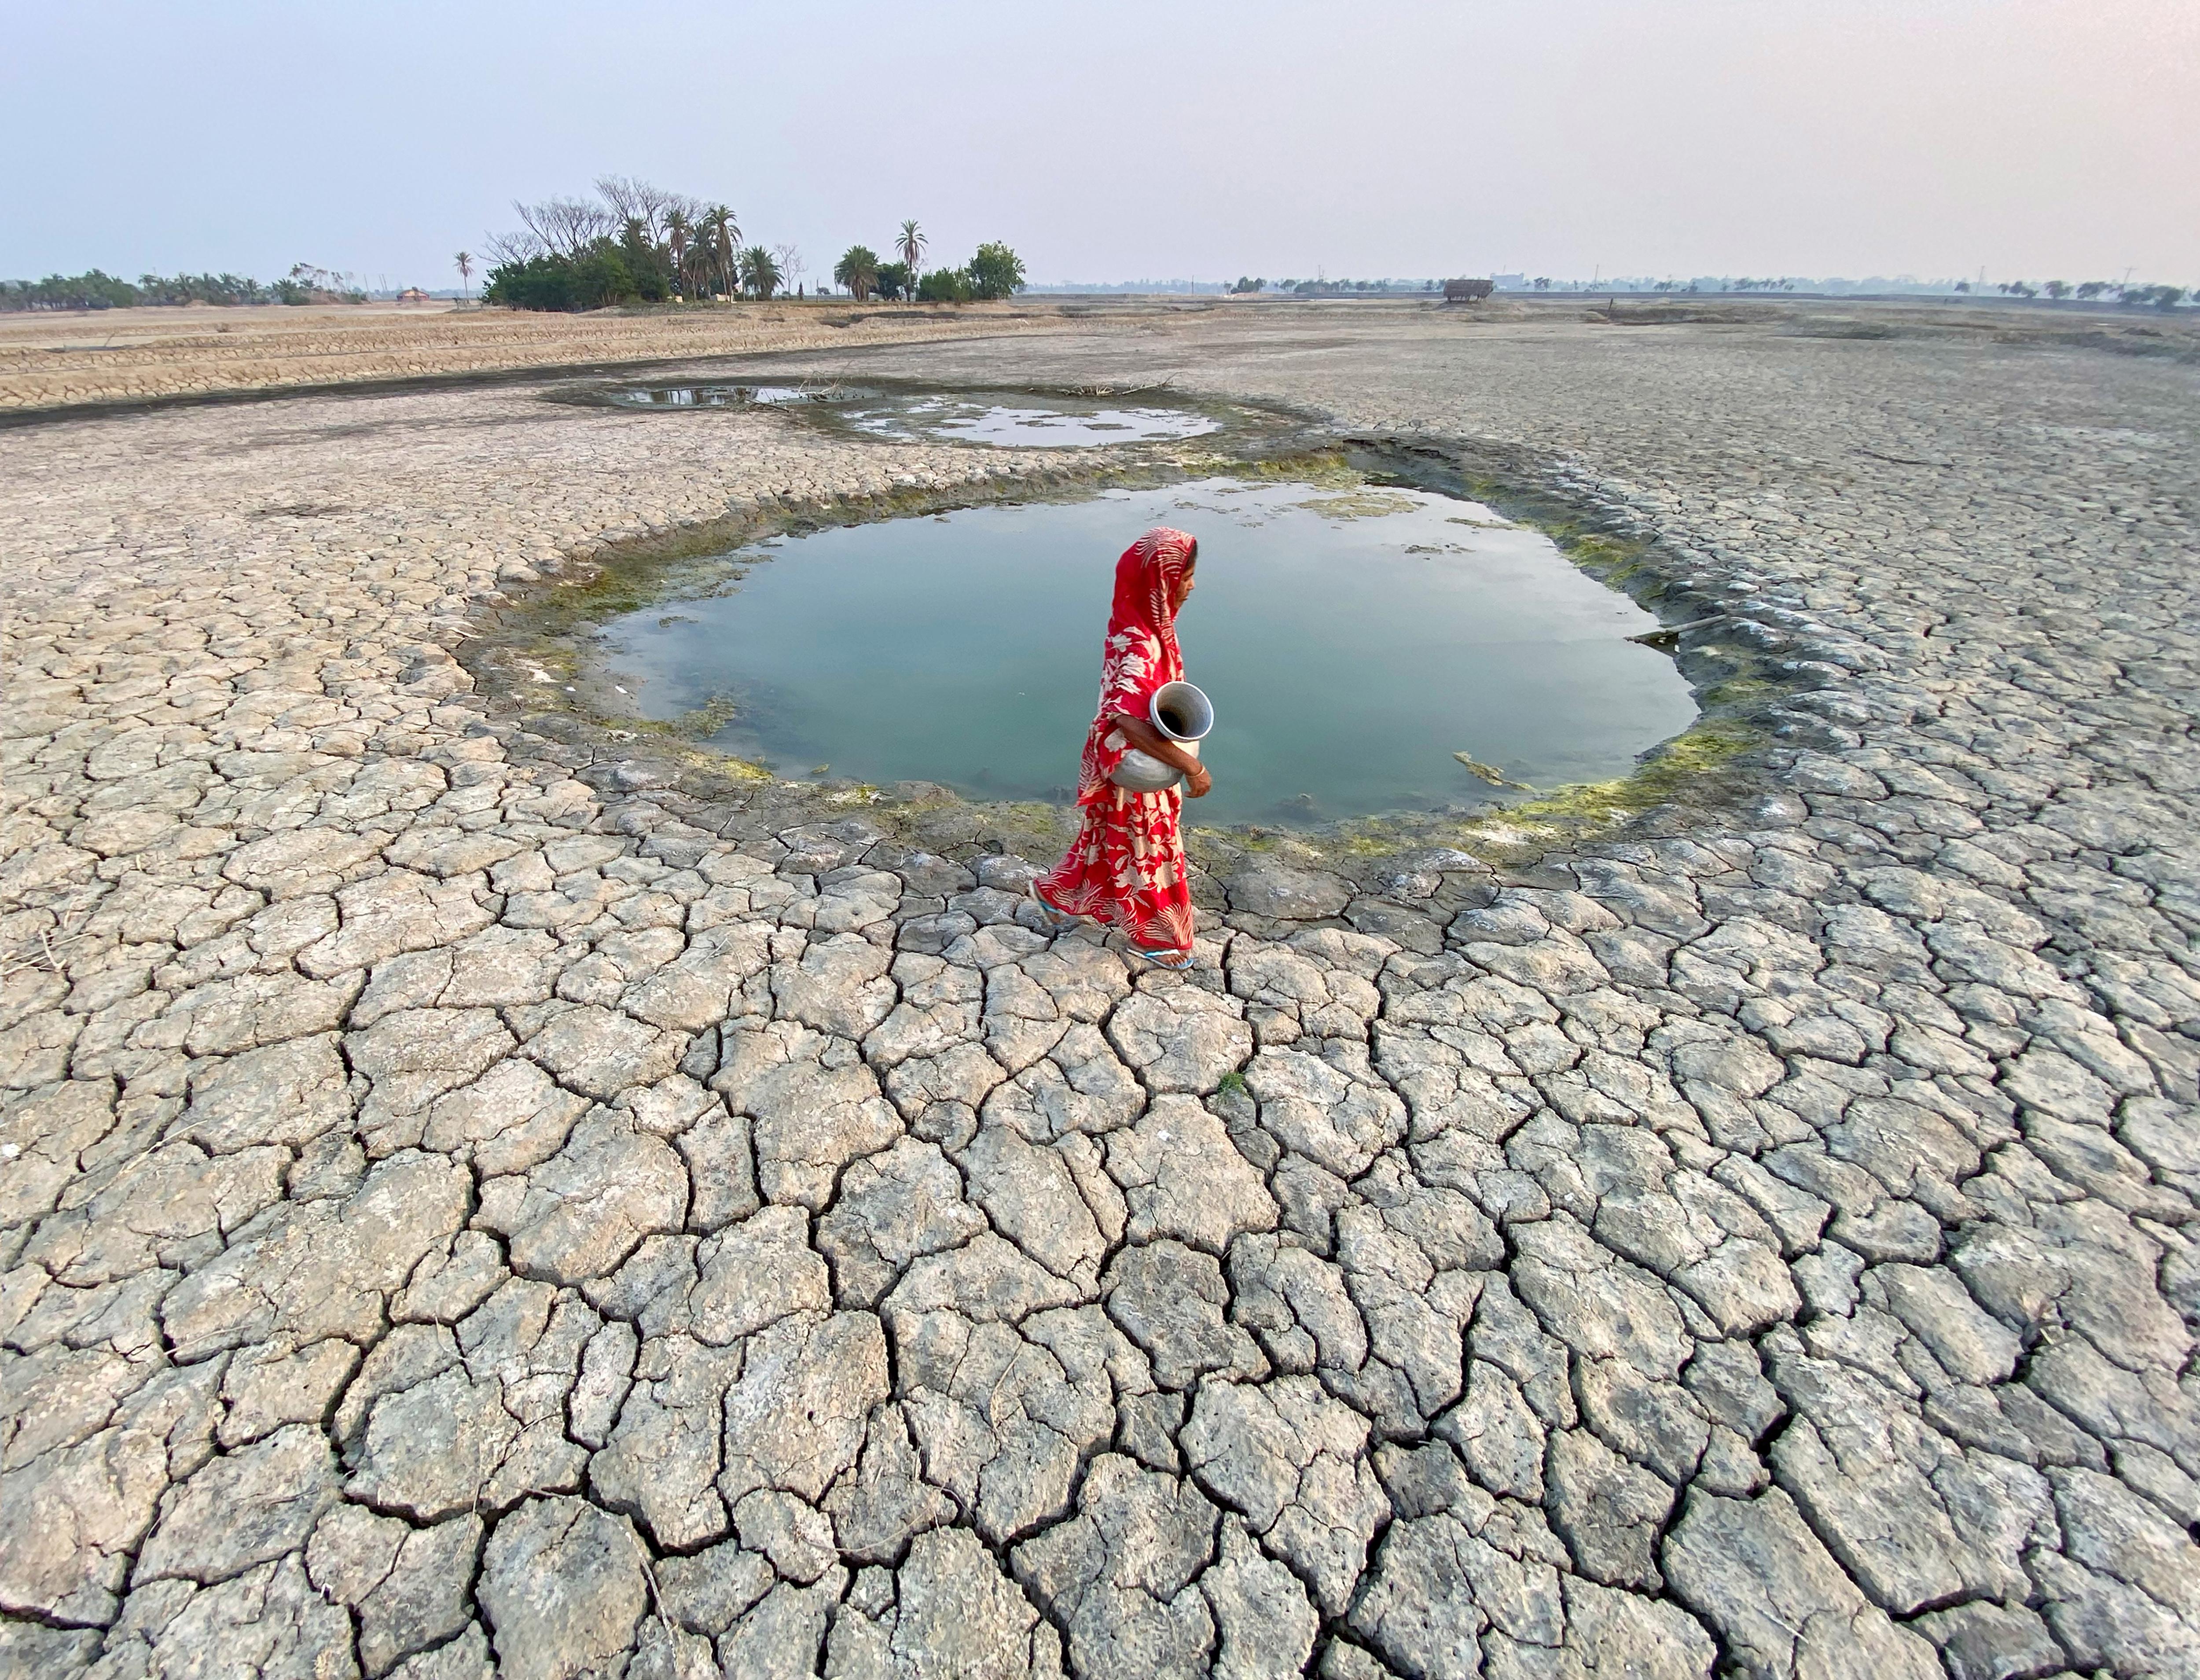 why climate change matters for gender equality. Photo: Md Harun Or Rashid